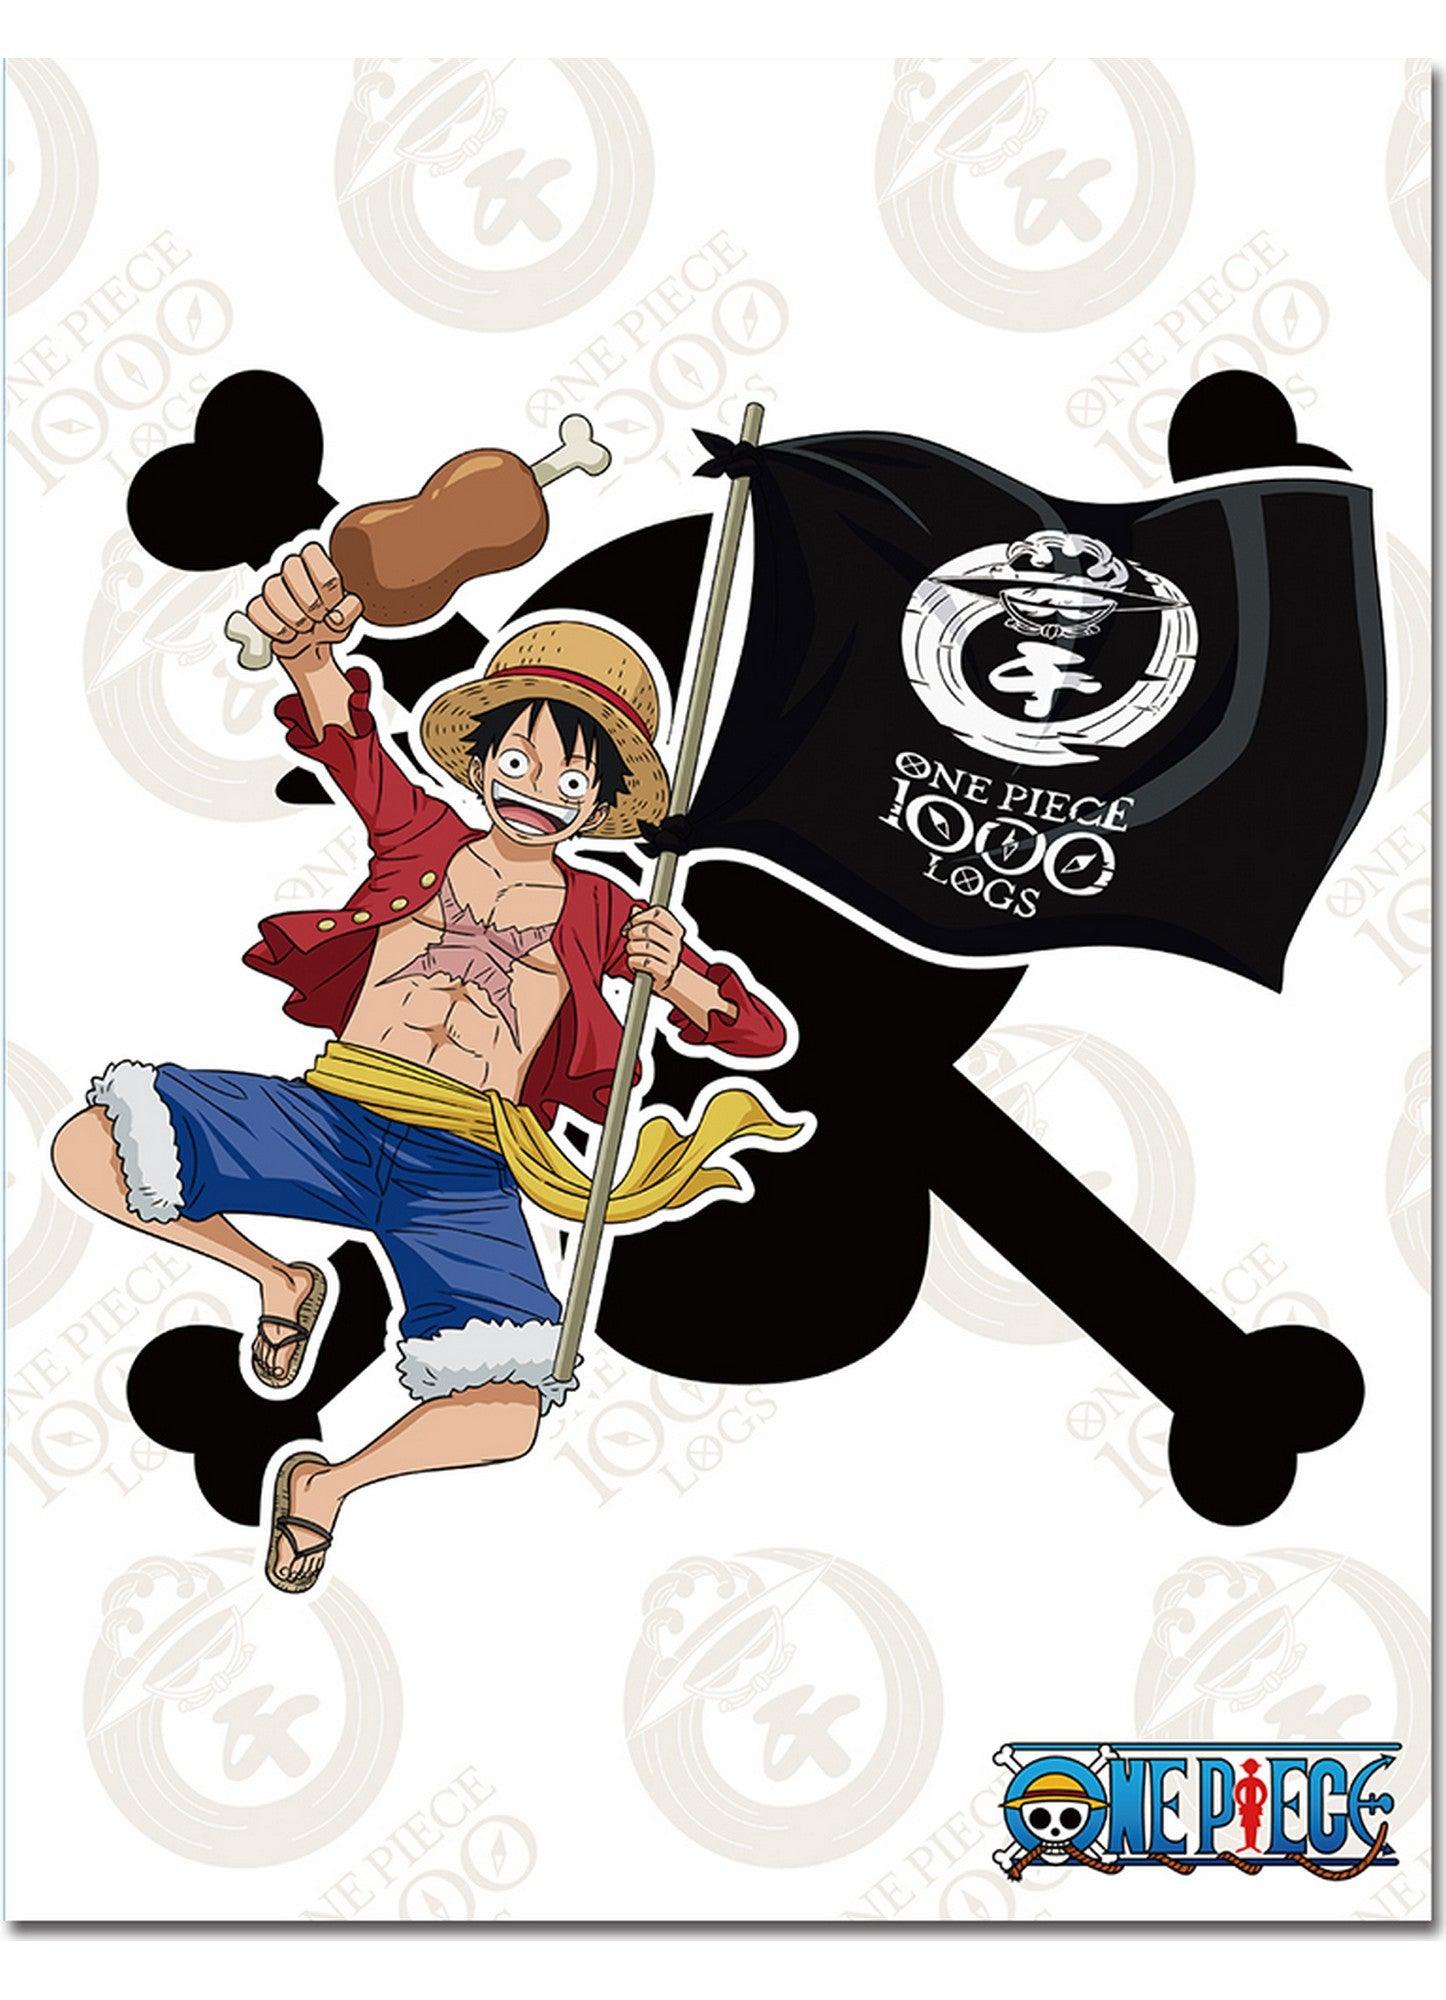 One Piece Anime Celebrates 1000th Episode With New Luffy Artwork